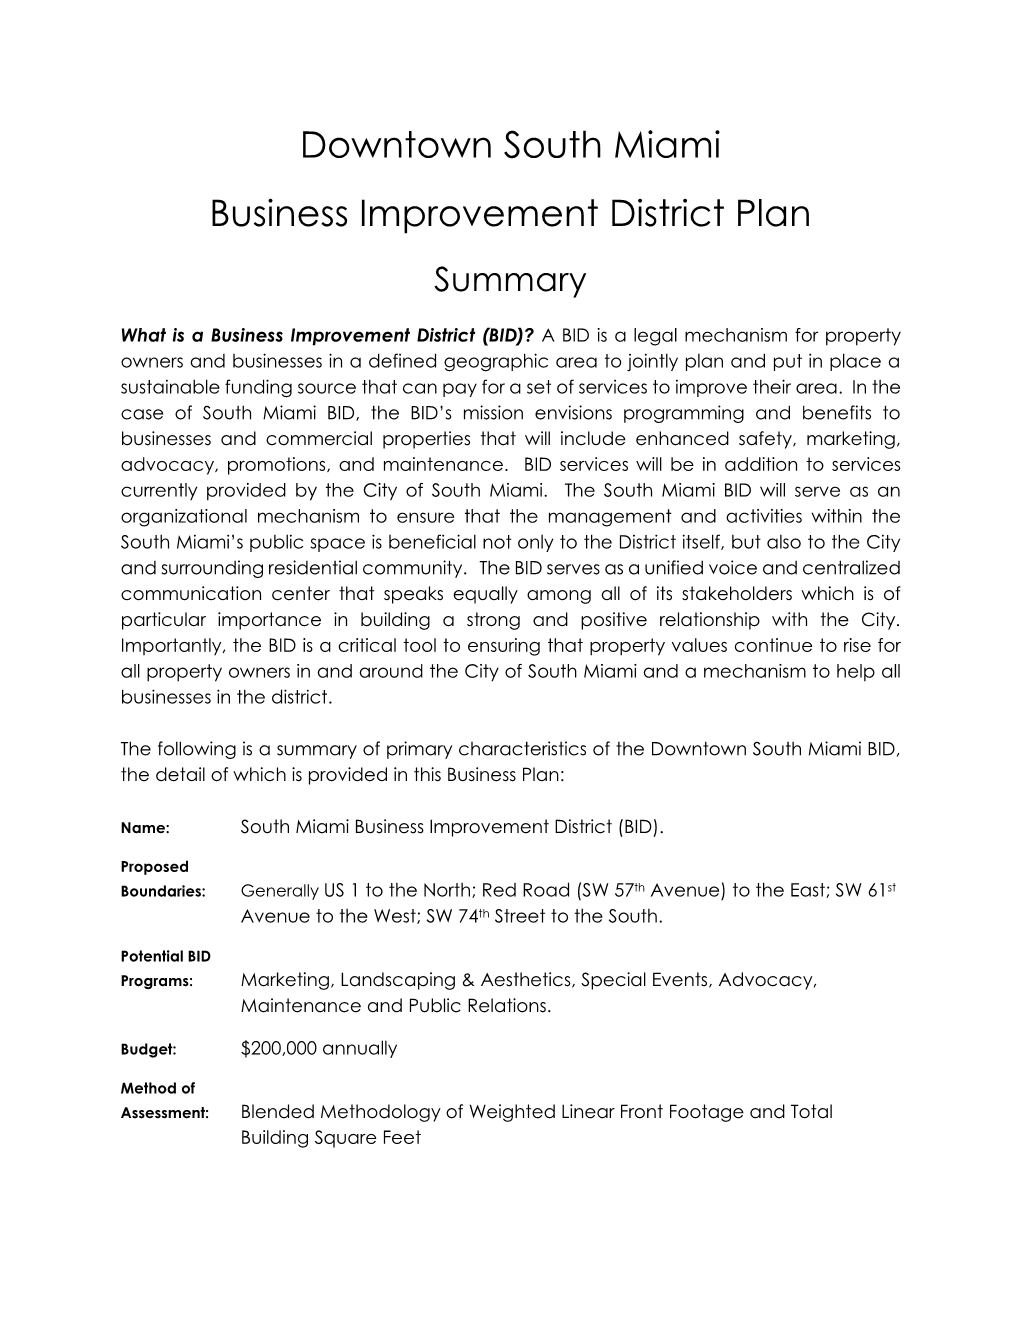 Downtown South Miami Business Improvement District Plan Summary